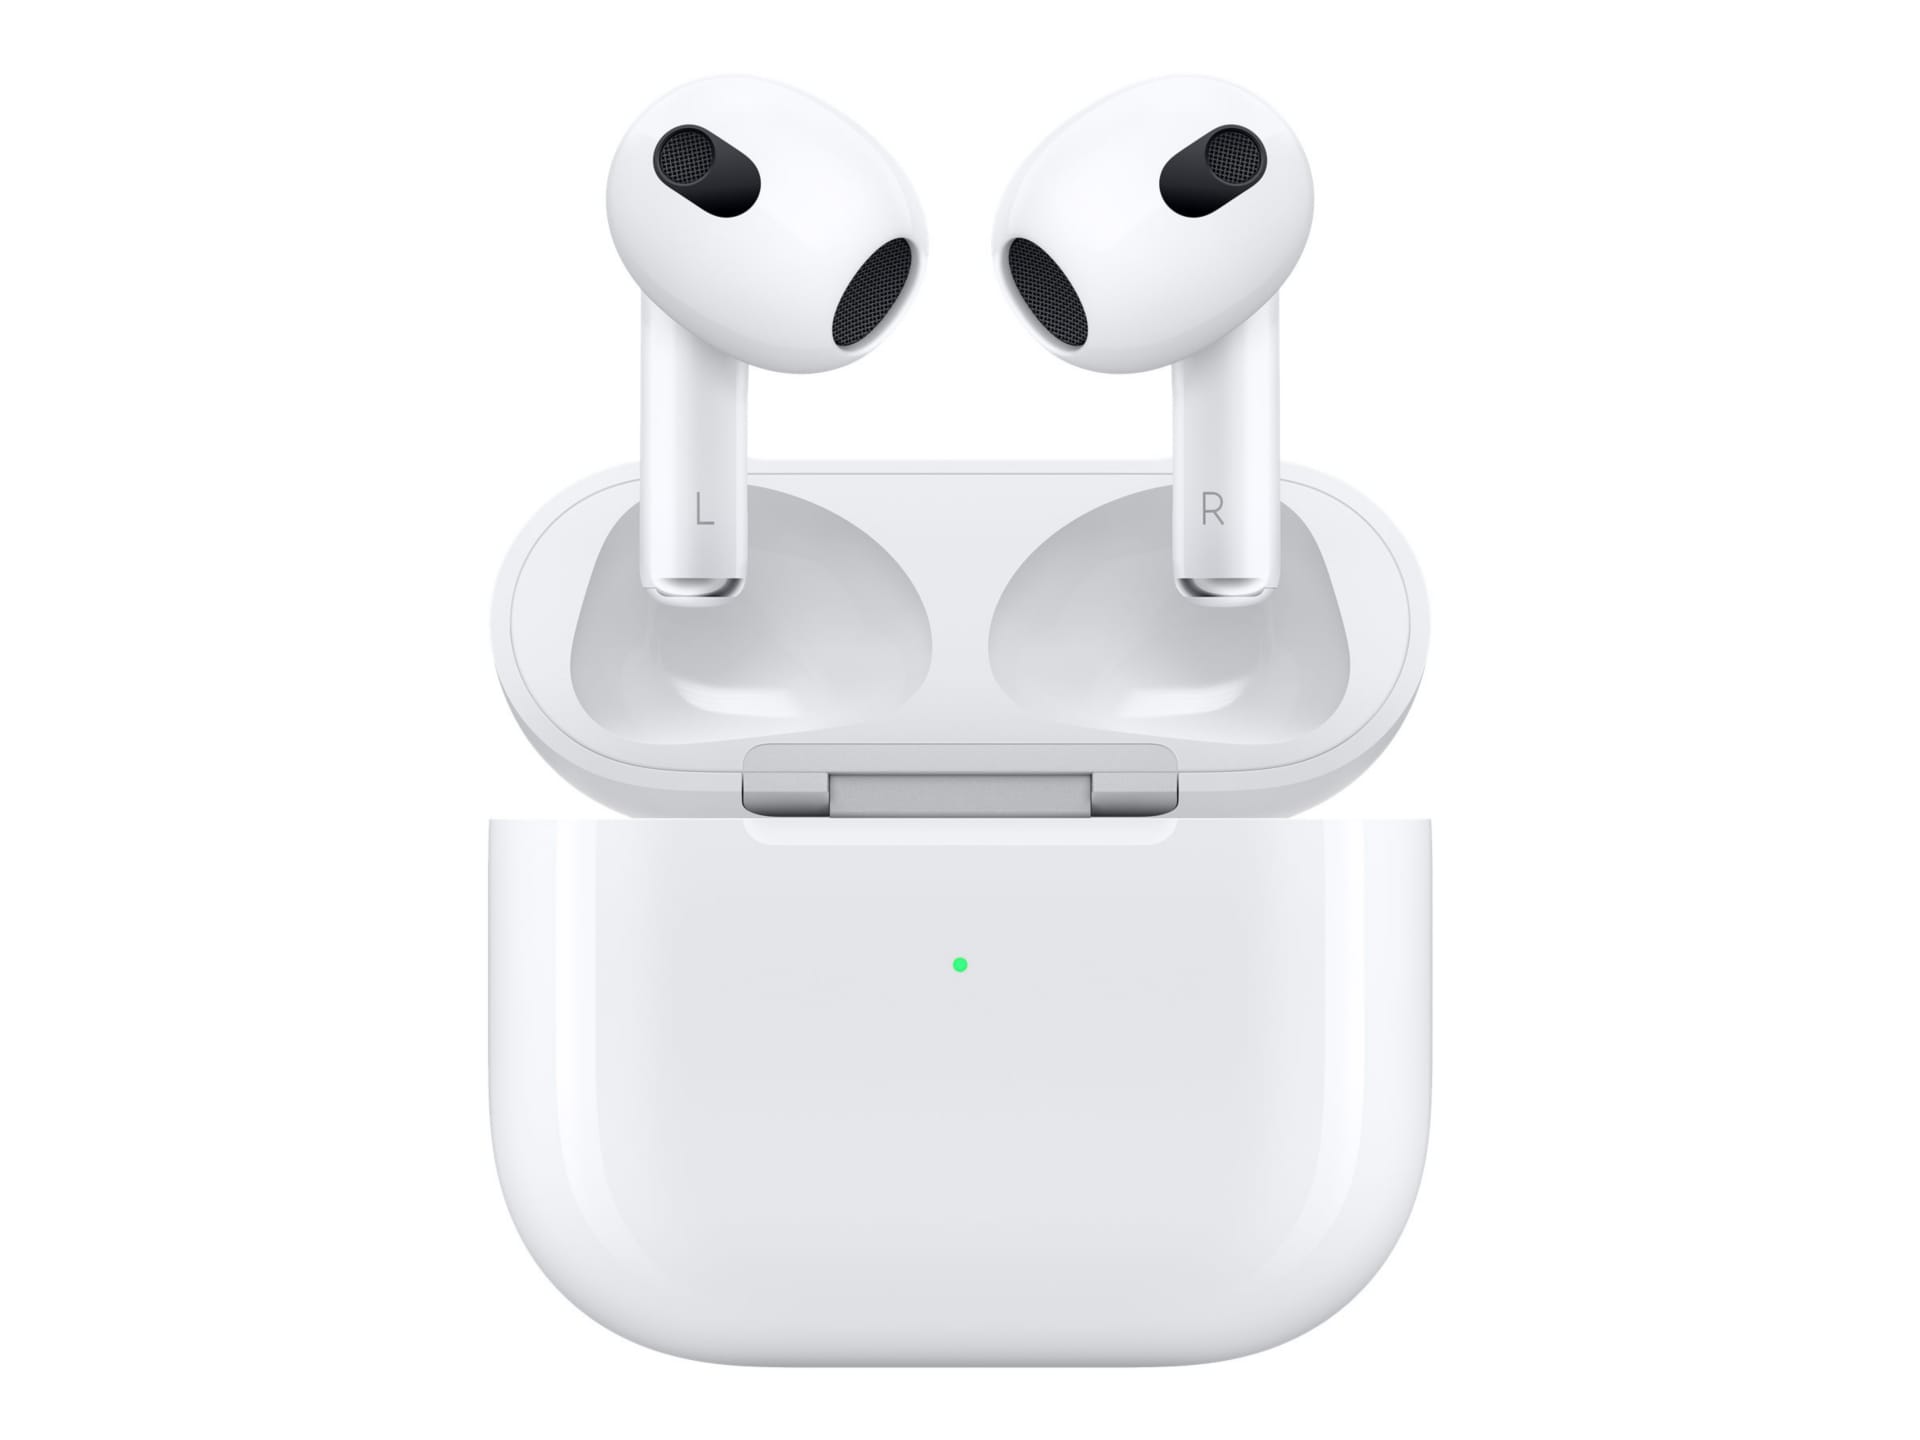 Apple AirPods with Lightning Charging Case 3rd generation - true wireless earphones with mic